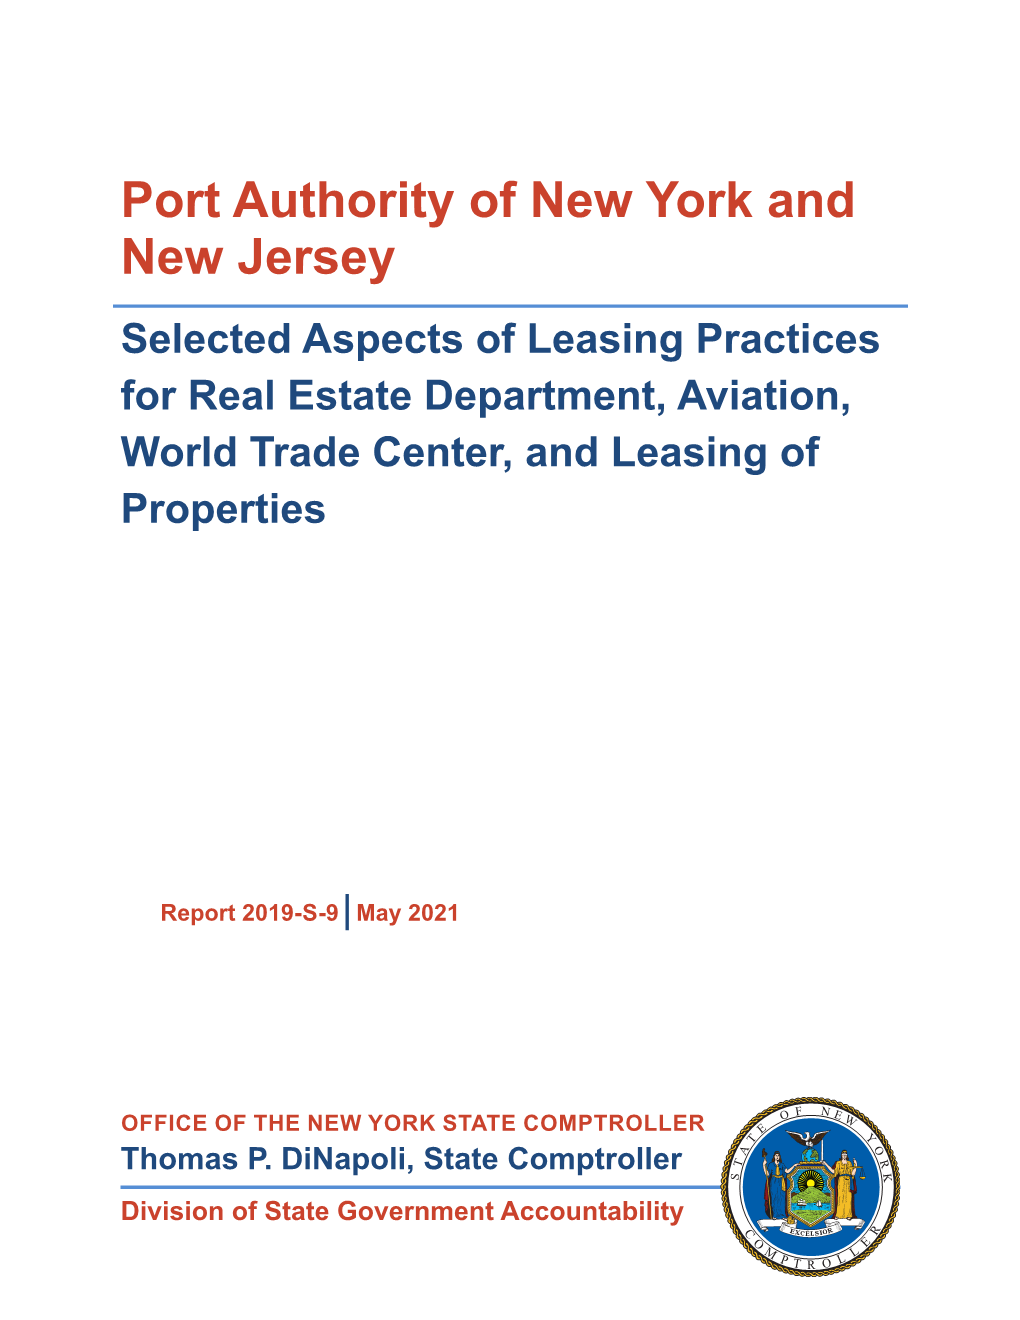 Port Authority of New York and New Jersey Selected Aspects of Leasing Practices for Real Estate Department, Aviation, World Trade Center, and Leasing of Properties